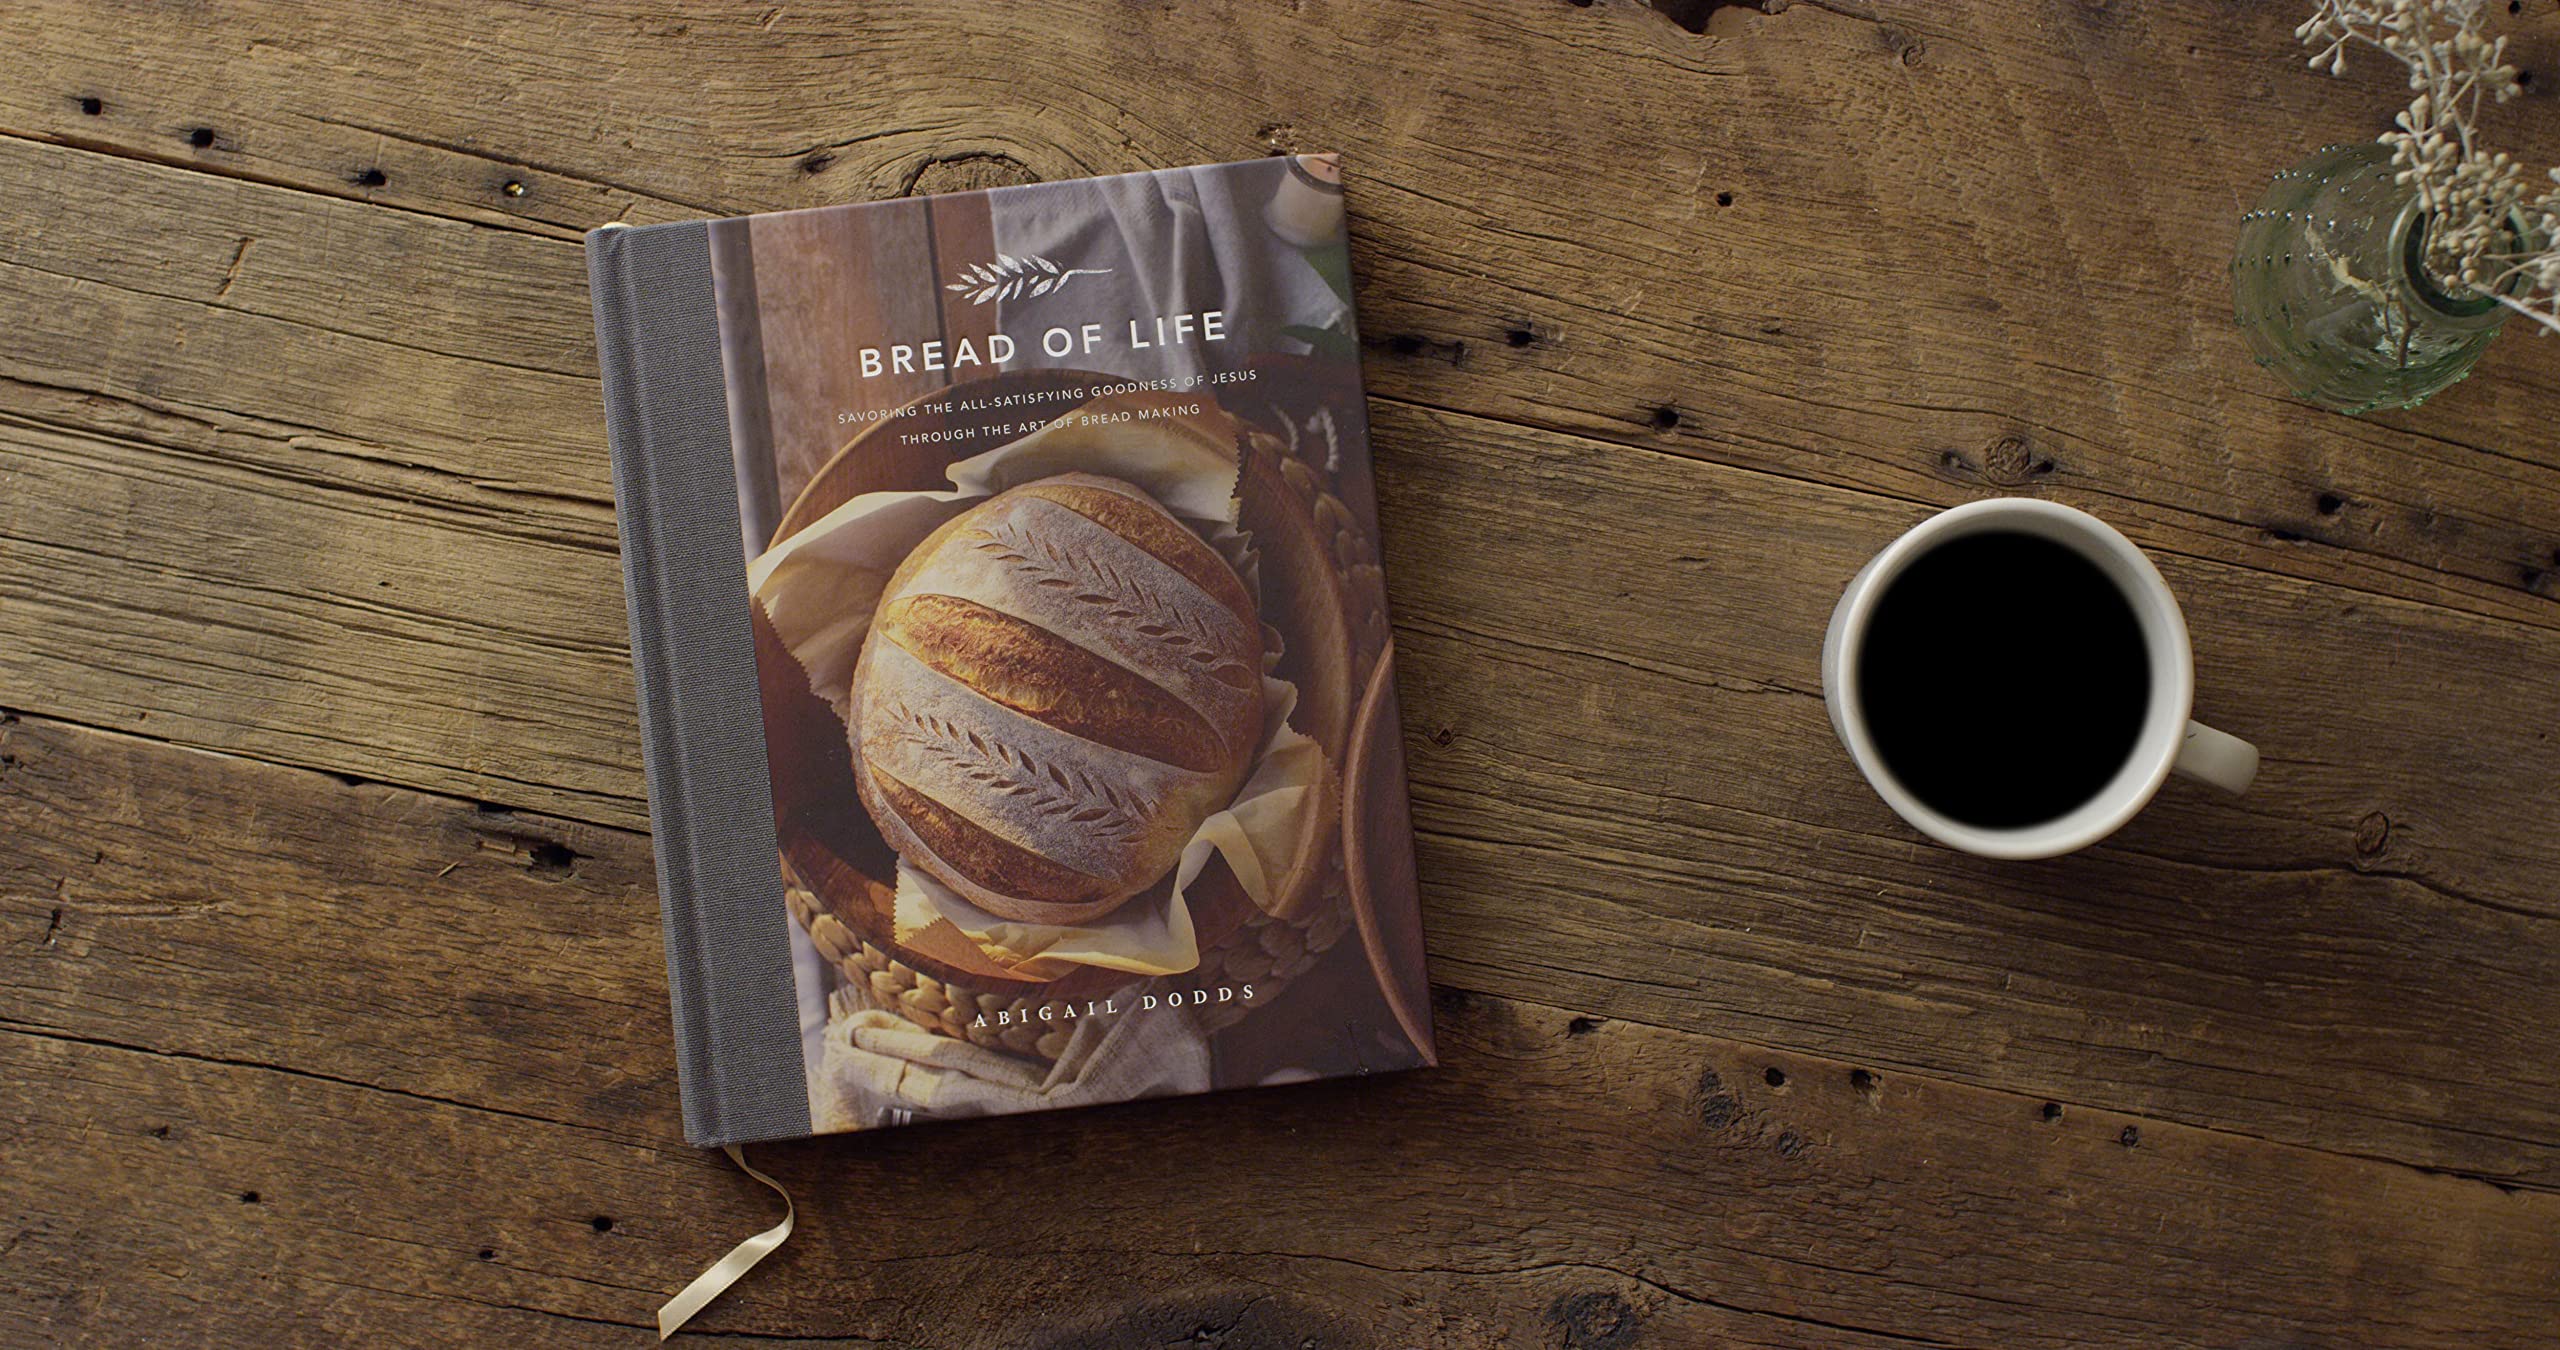 Bread of Life: Savoring the All-Satisfying Goodness of Jesus through the Art of Bread Making